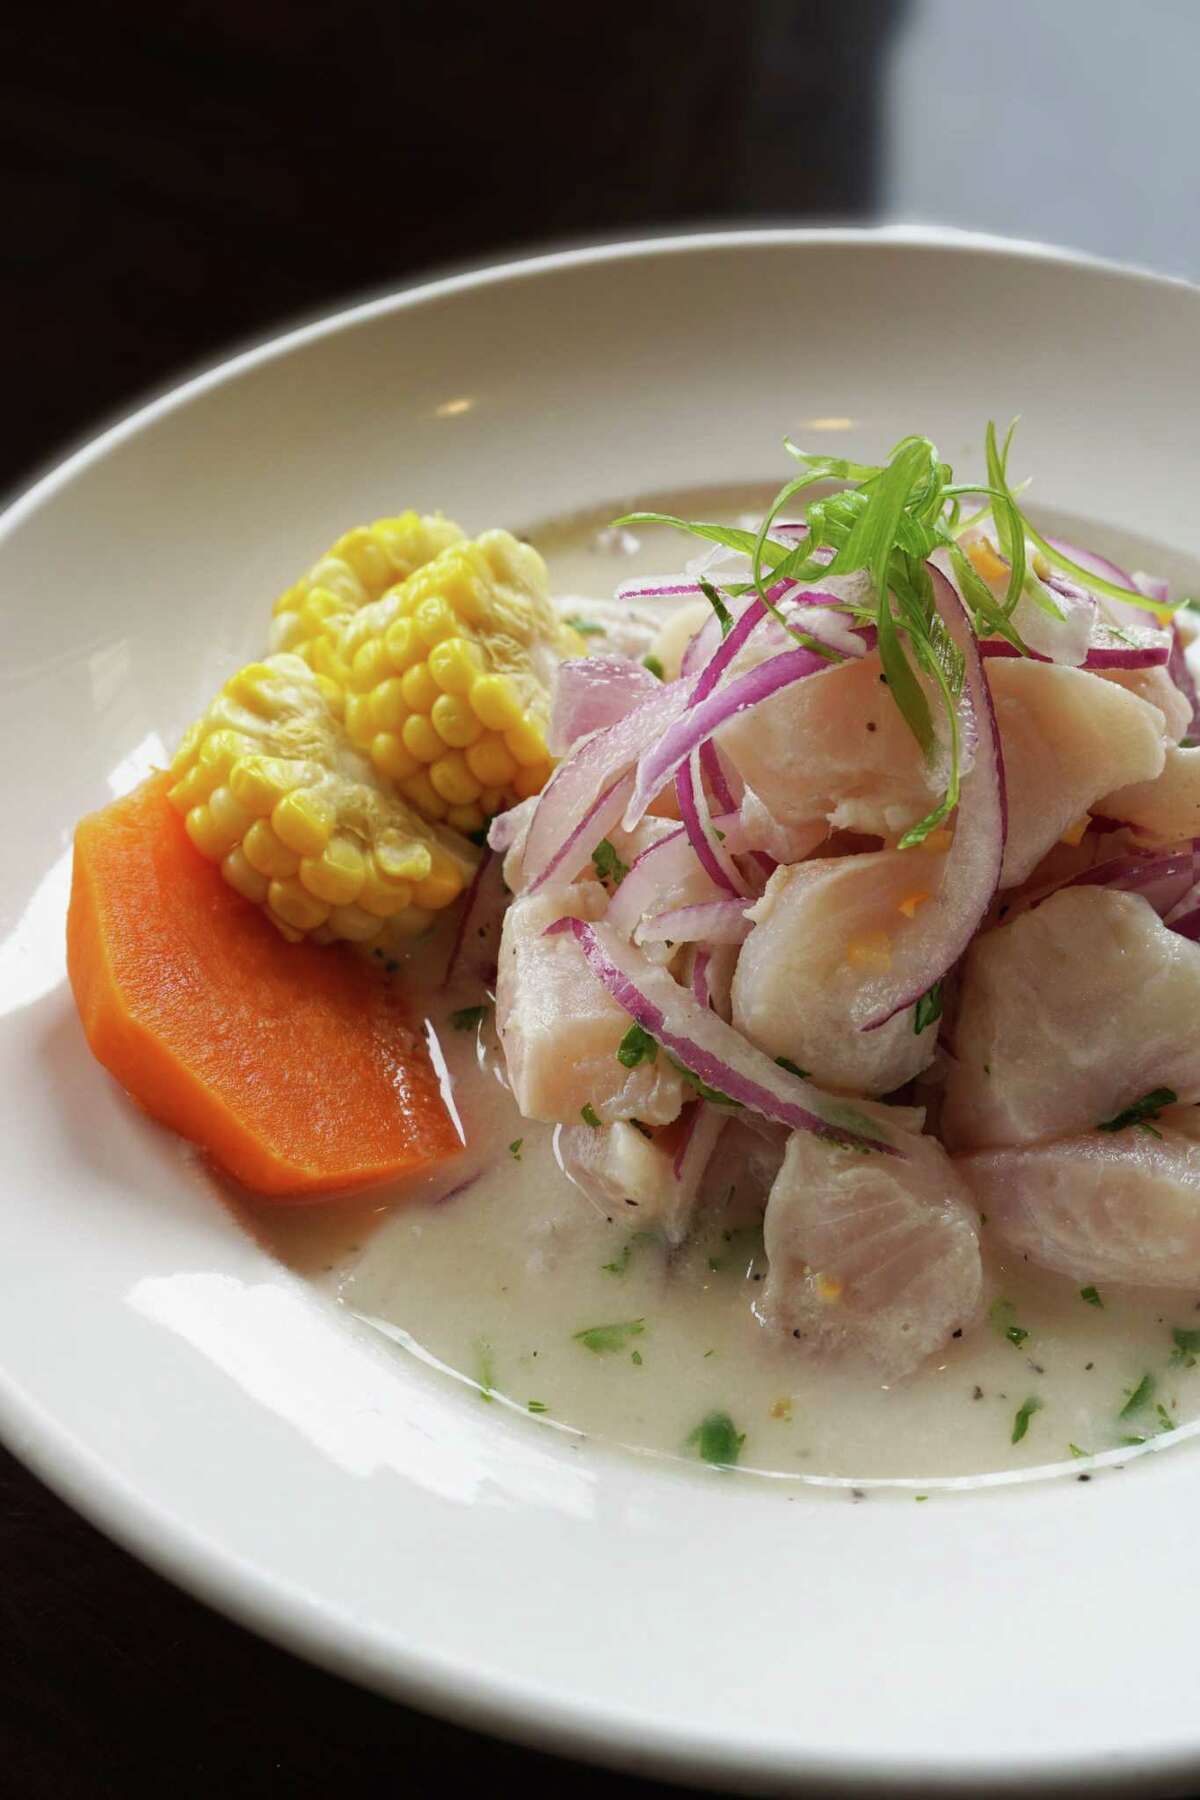 Peruvian ceviche, bathed in leche de tigre, is a signature dish at Latin Bites Kitchen on Woodway.